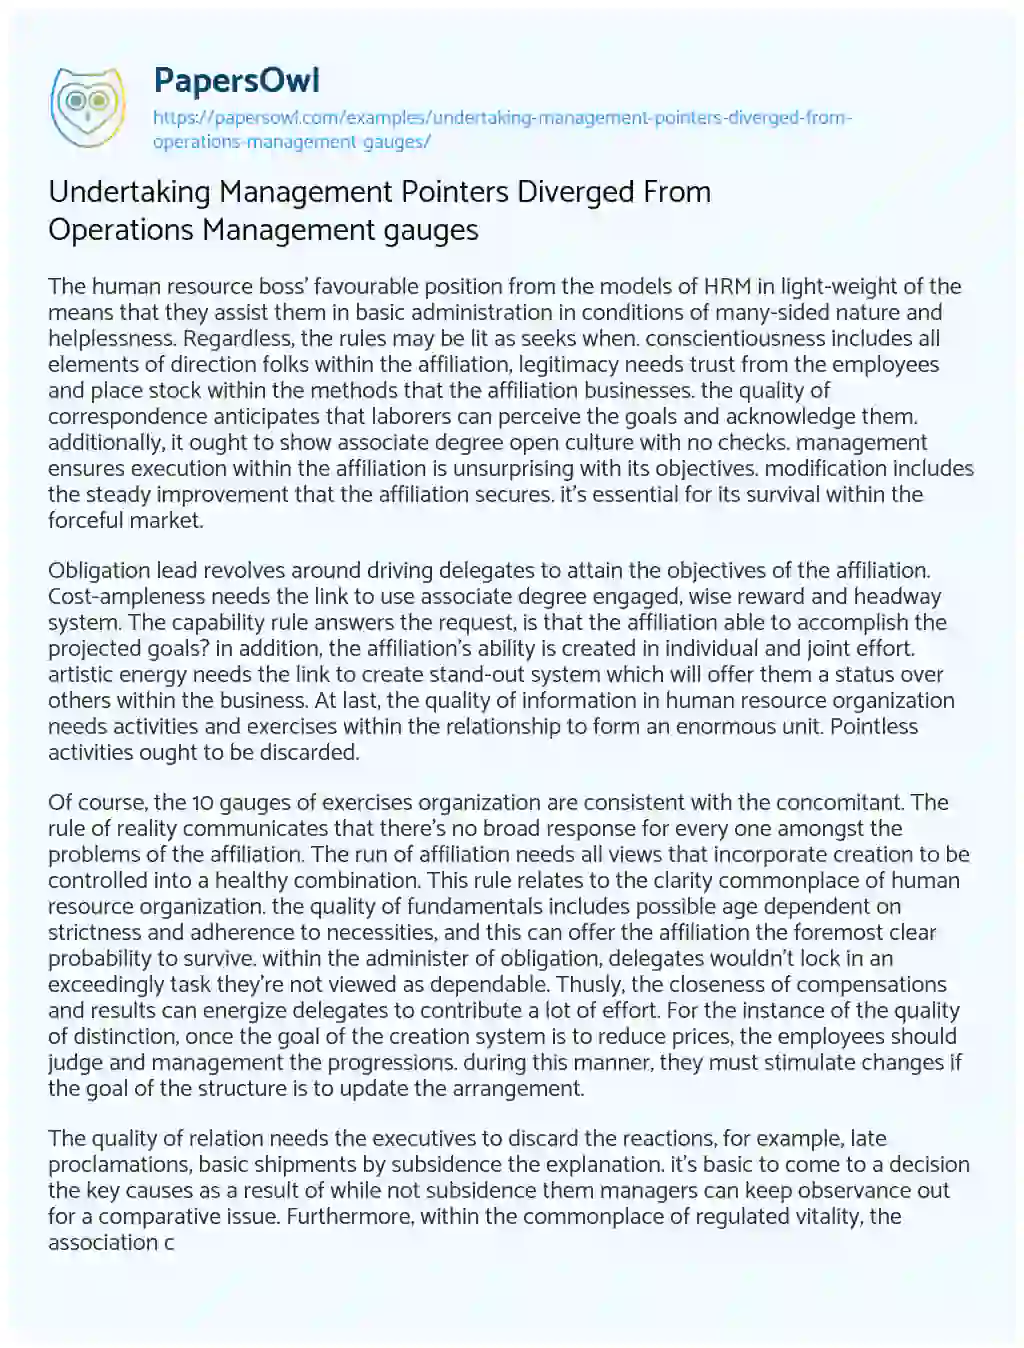 Undertaking Management Pointers Diverged from Operations Management Gauges essay